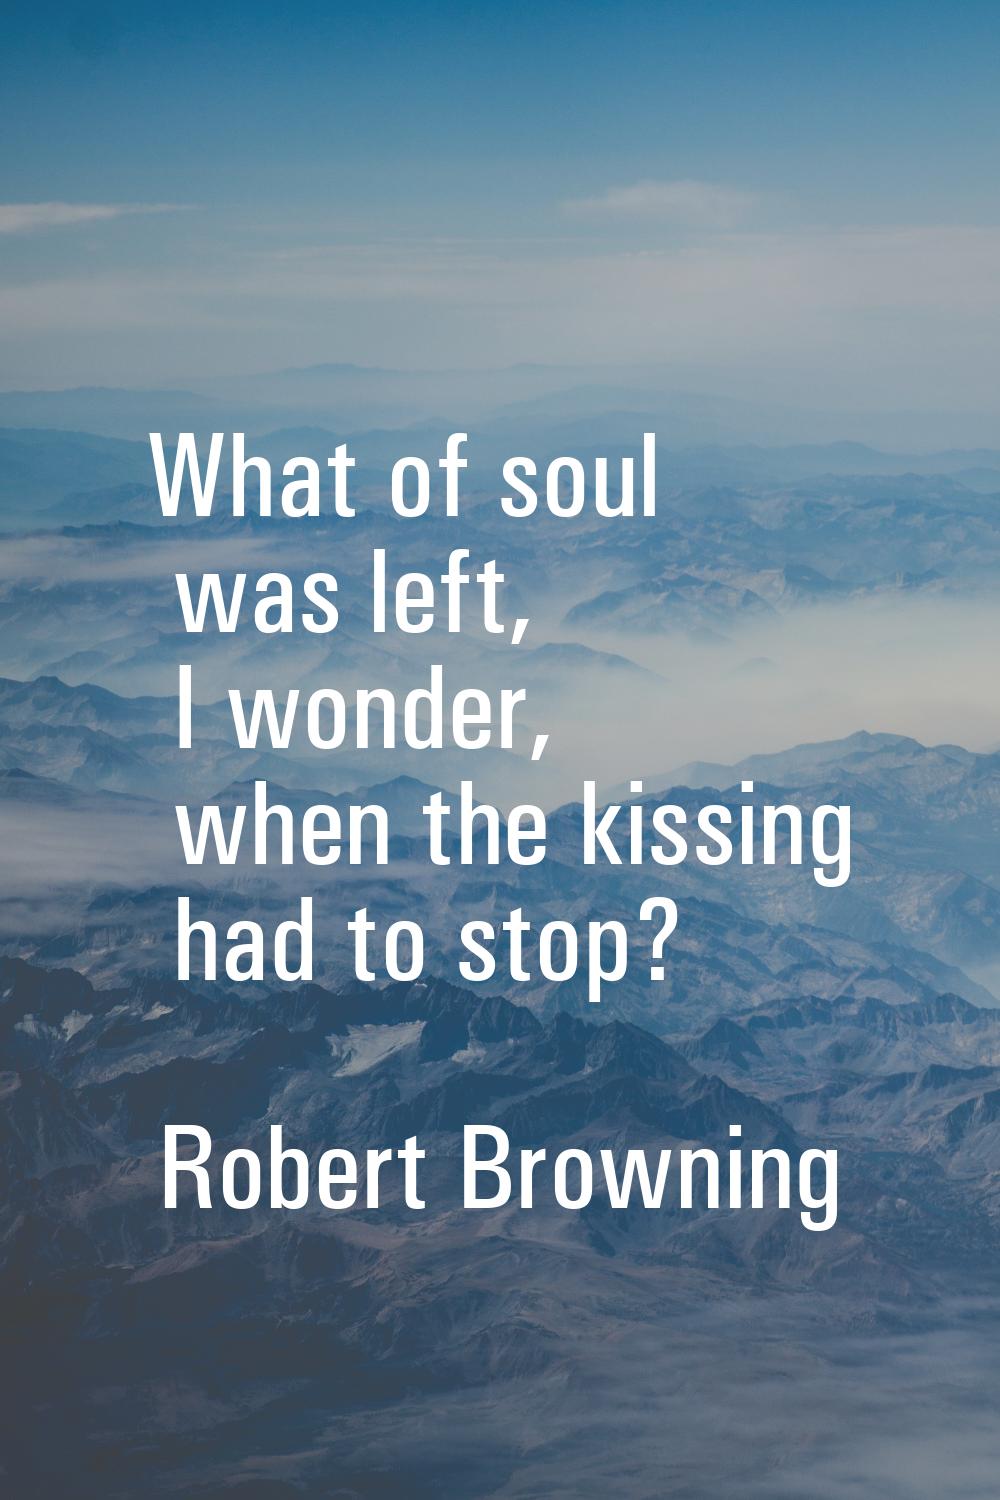 What of soul was left, I wonder, when the kissing had to stop?